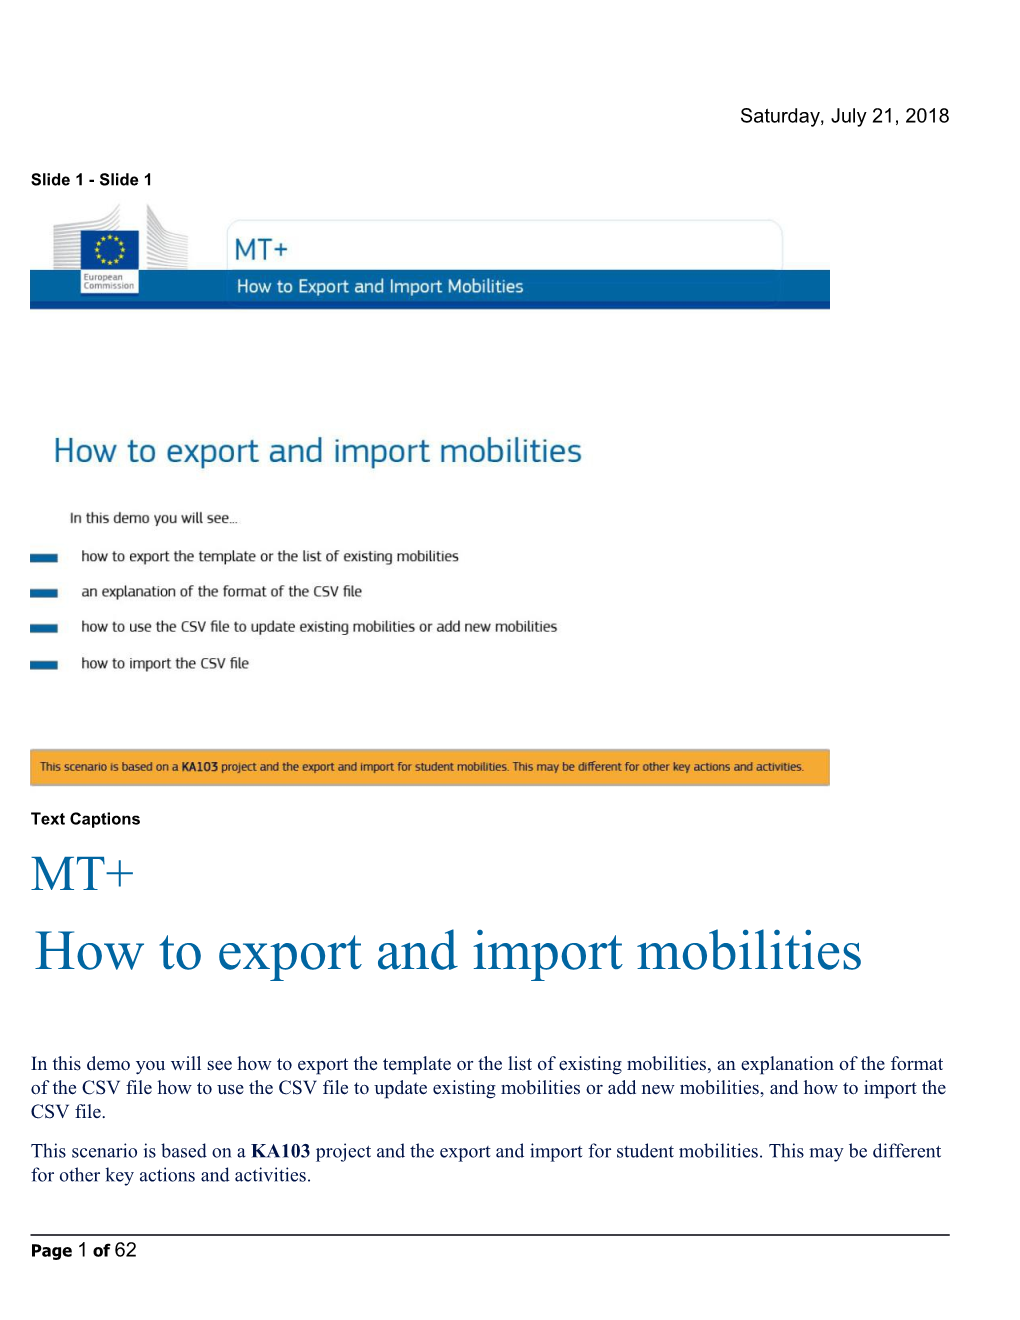 How to Export and Import Mobilities